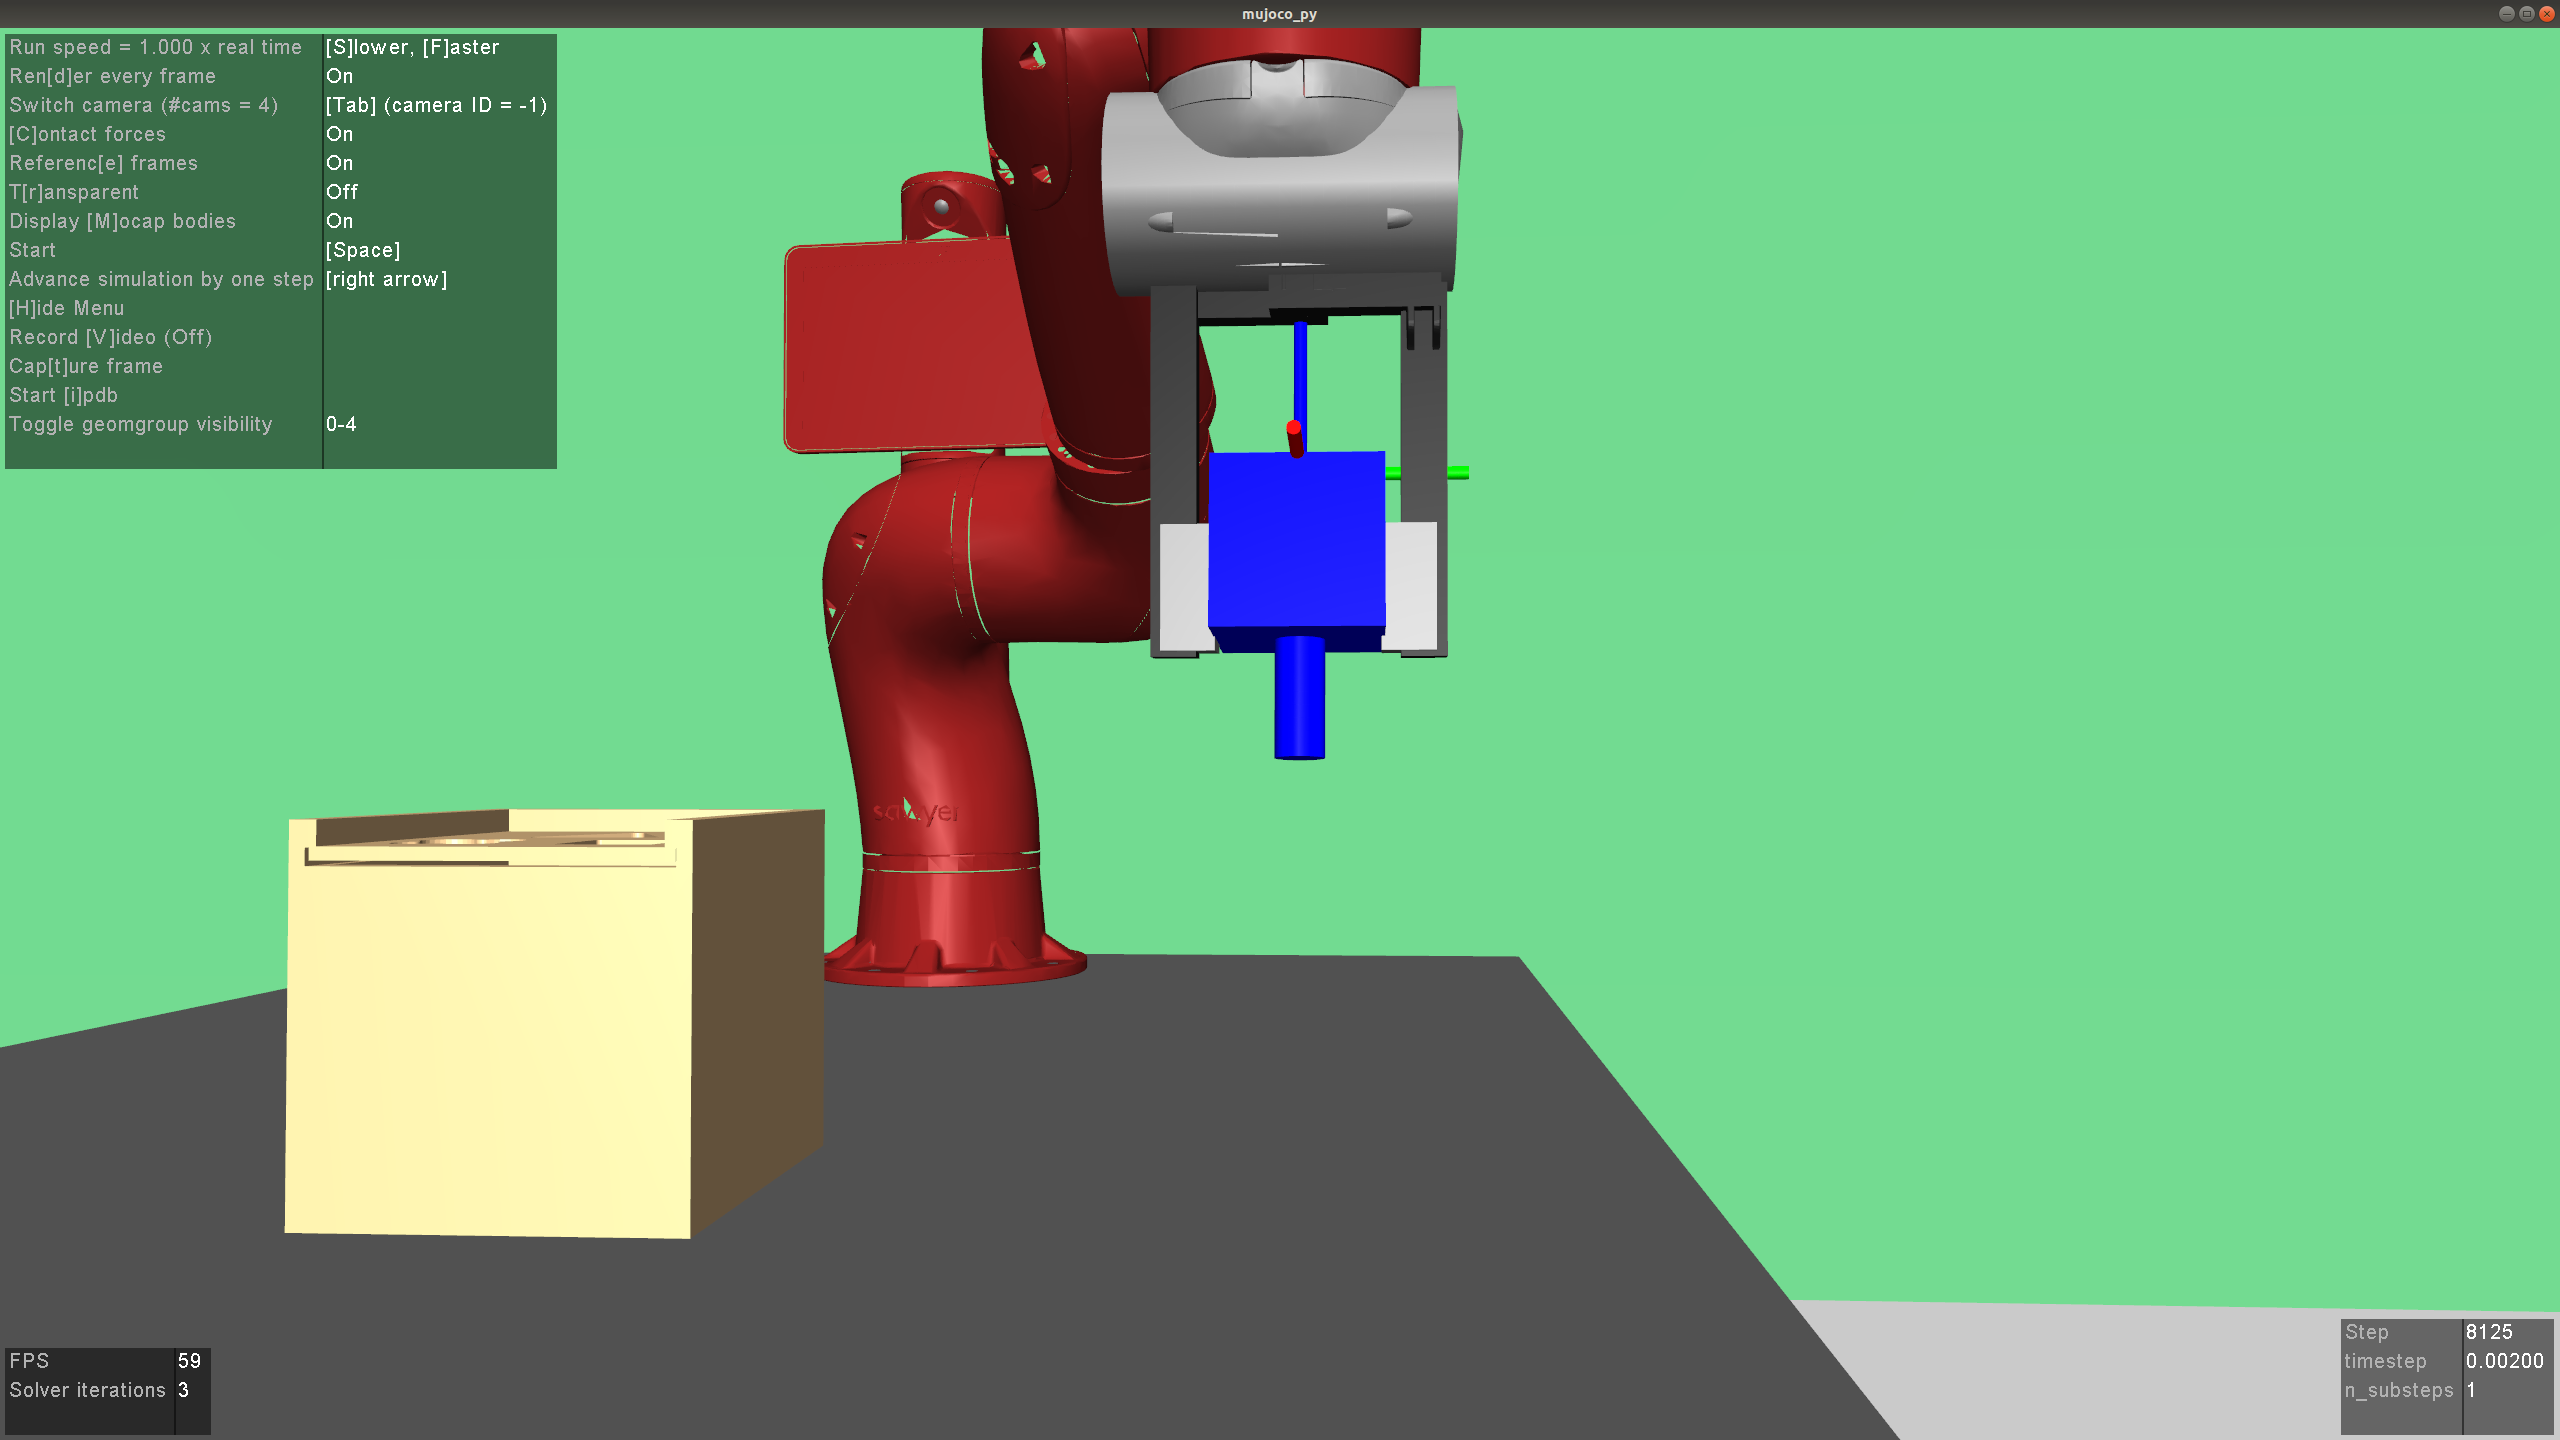 Simulation of multitask environment in MuJoCo. A Sawyer arm uses a graspable peg (in blue) to manipulate a box with a lid.